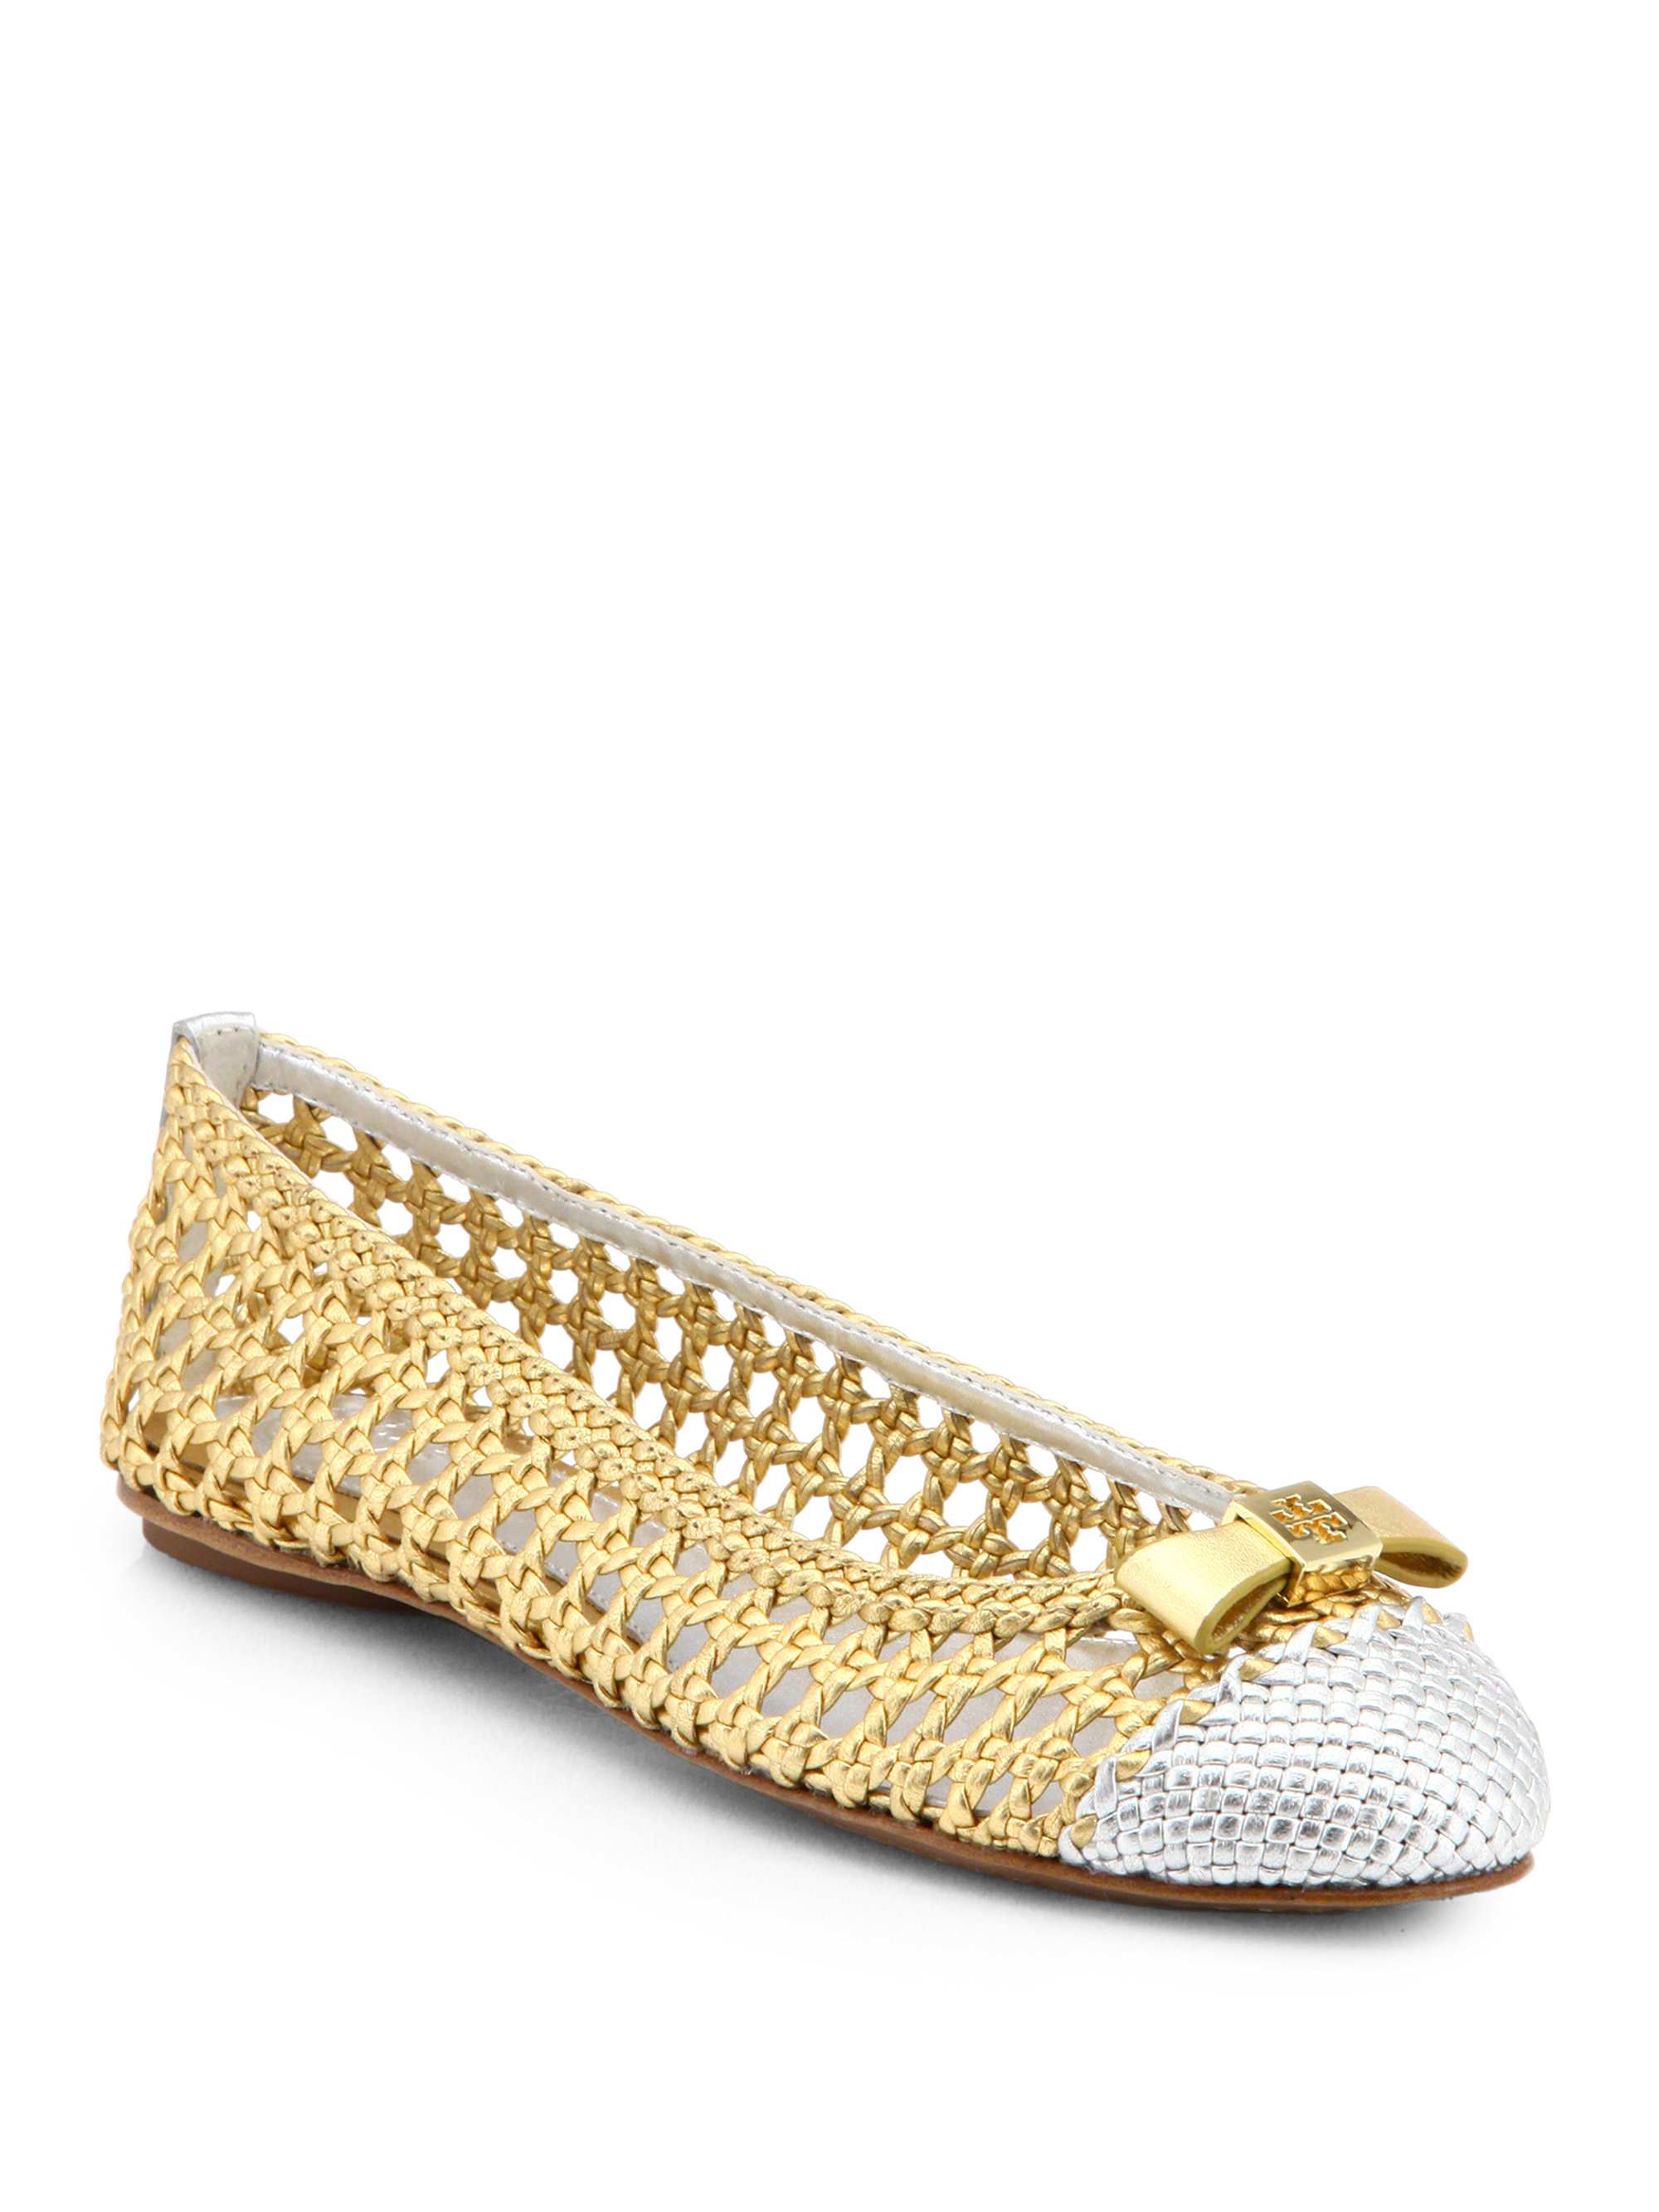 Lyst - Tory Burch Carlyle Woven Metallic Leather Ballet Flats in Metallic